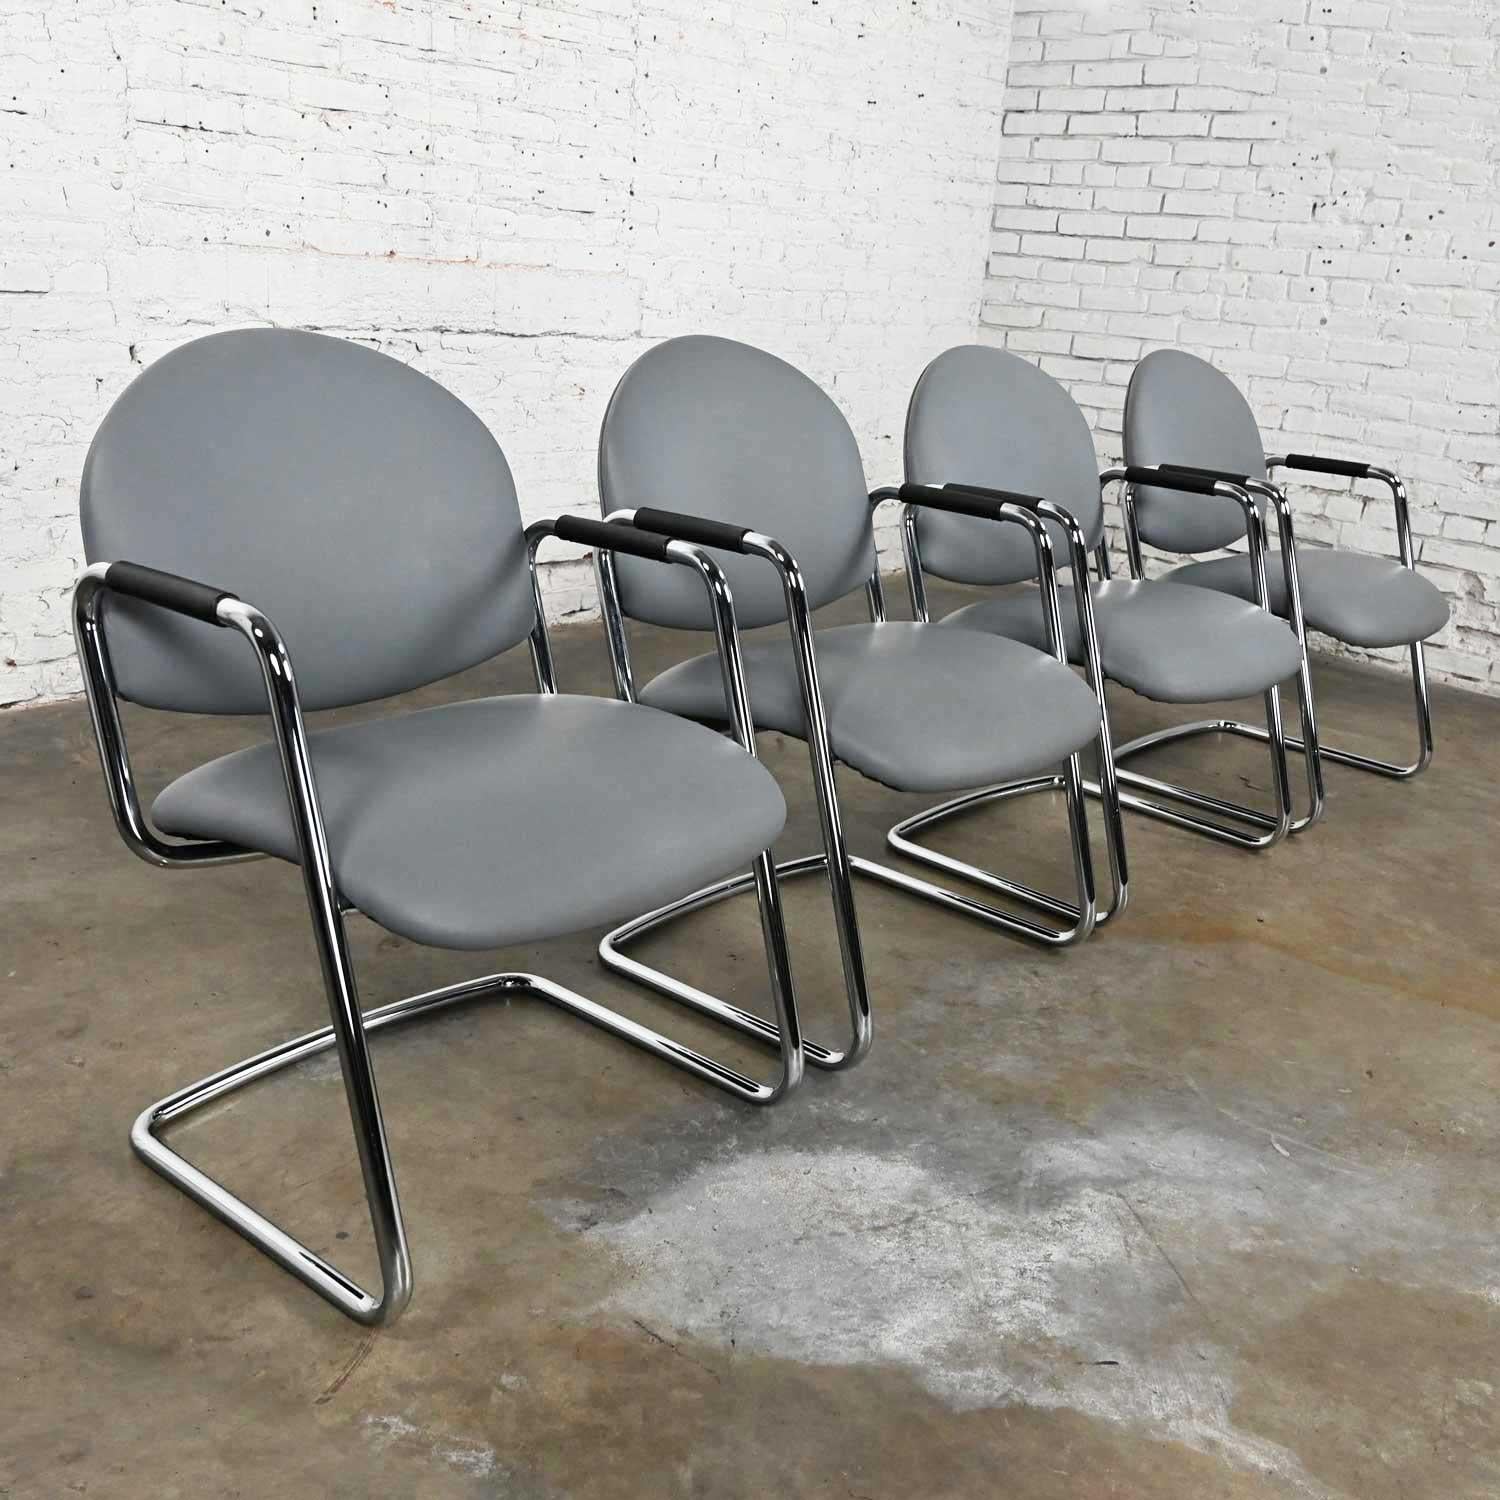 Modern Steelcase Chrome Tube Cantilever Base & Gray Faux Leather Chairs set of 4 In Good Condition For Sale In Topeka, KS